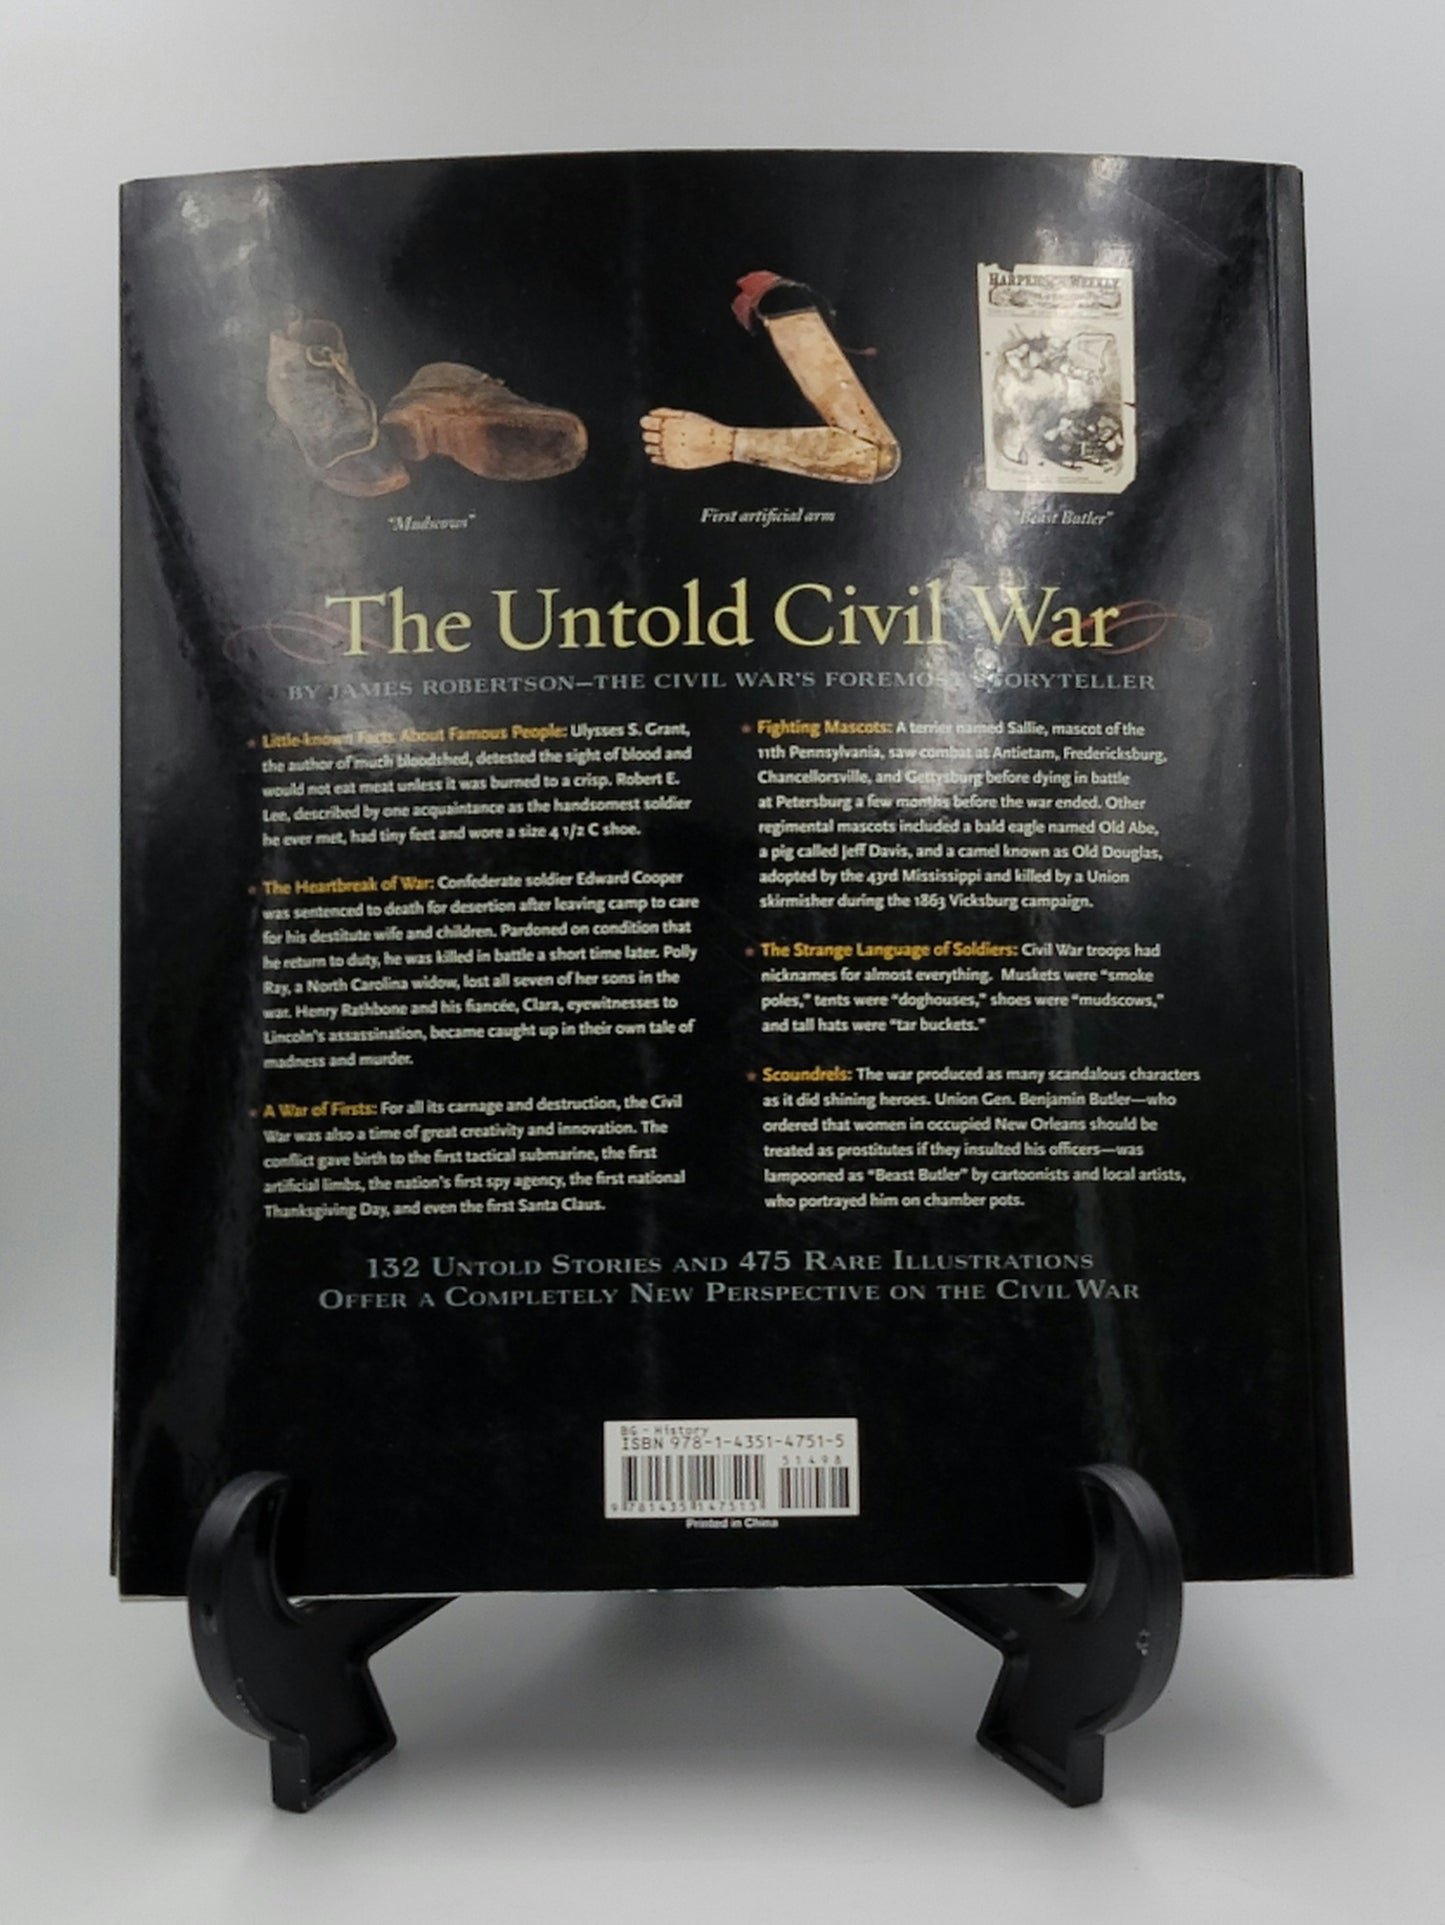 The Untold Story: Exploring the Human Side of War Civil War By: James Robertson